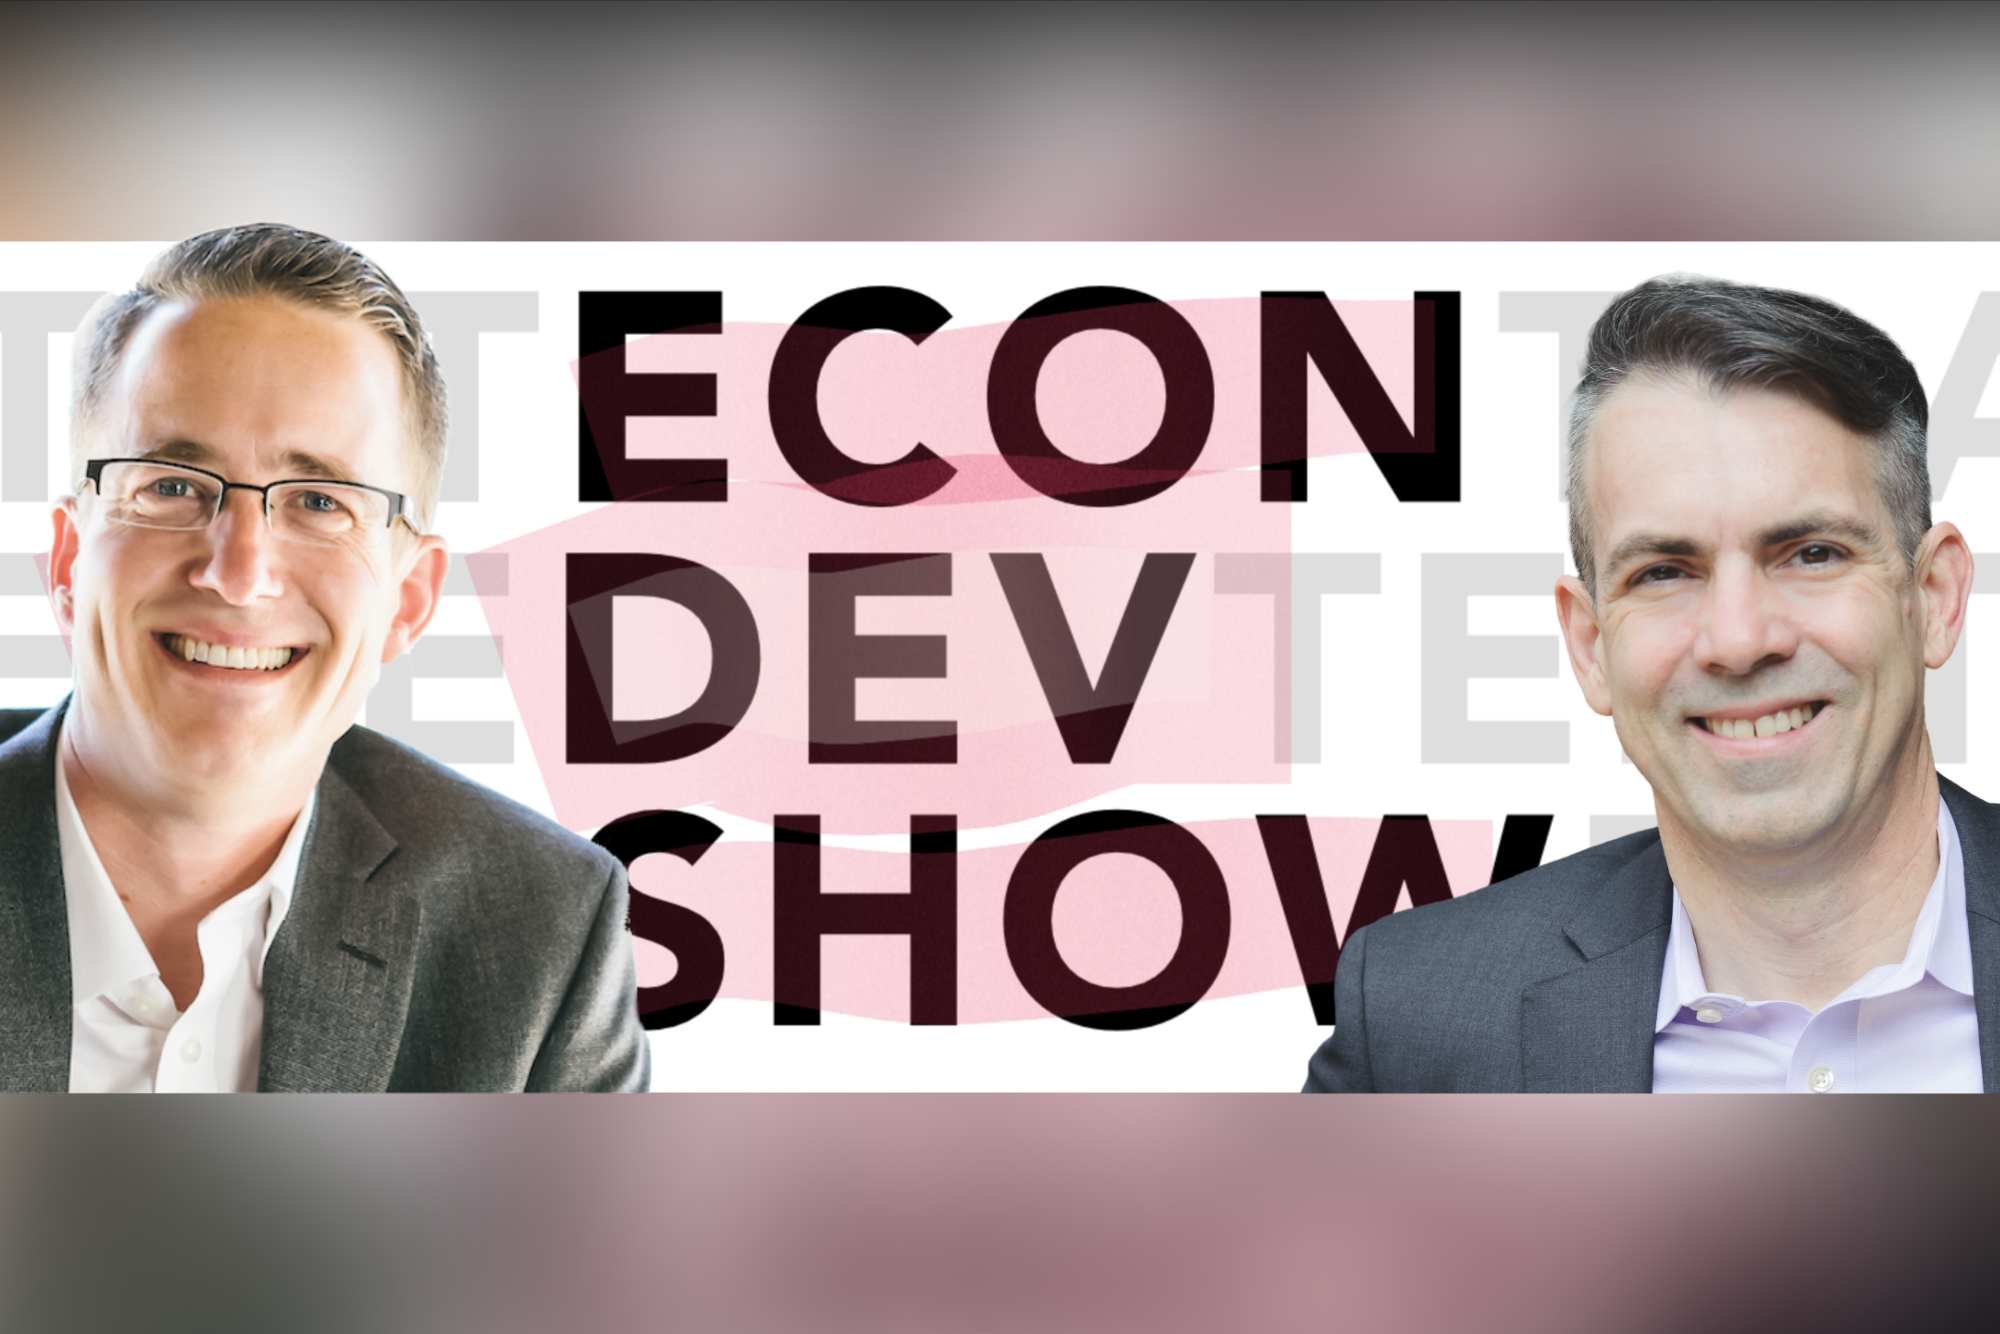 Podcast #92: The Human Centered Approach to Economic Development with Larry Holt